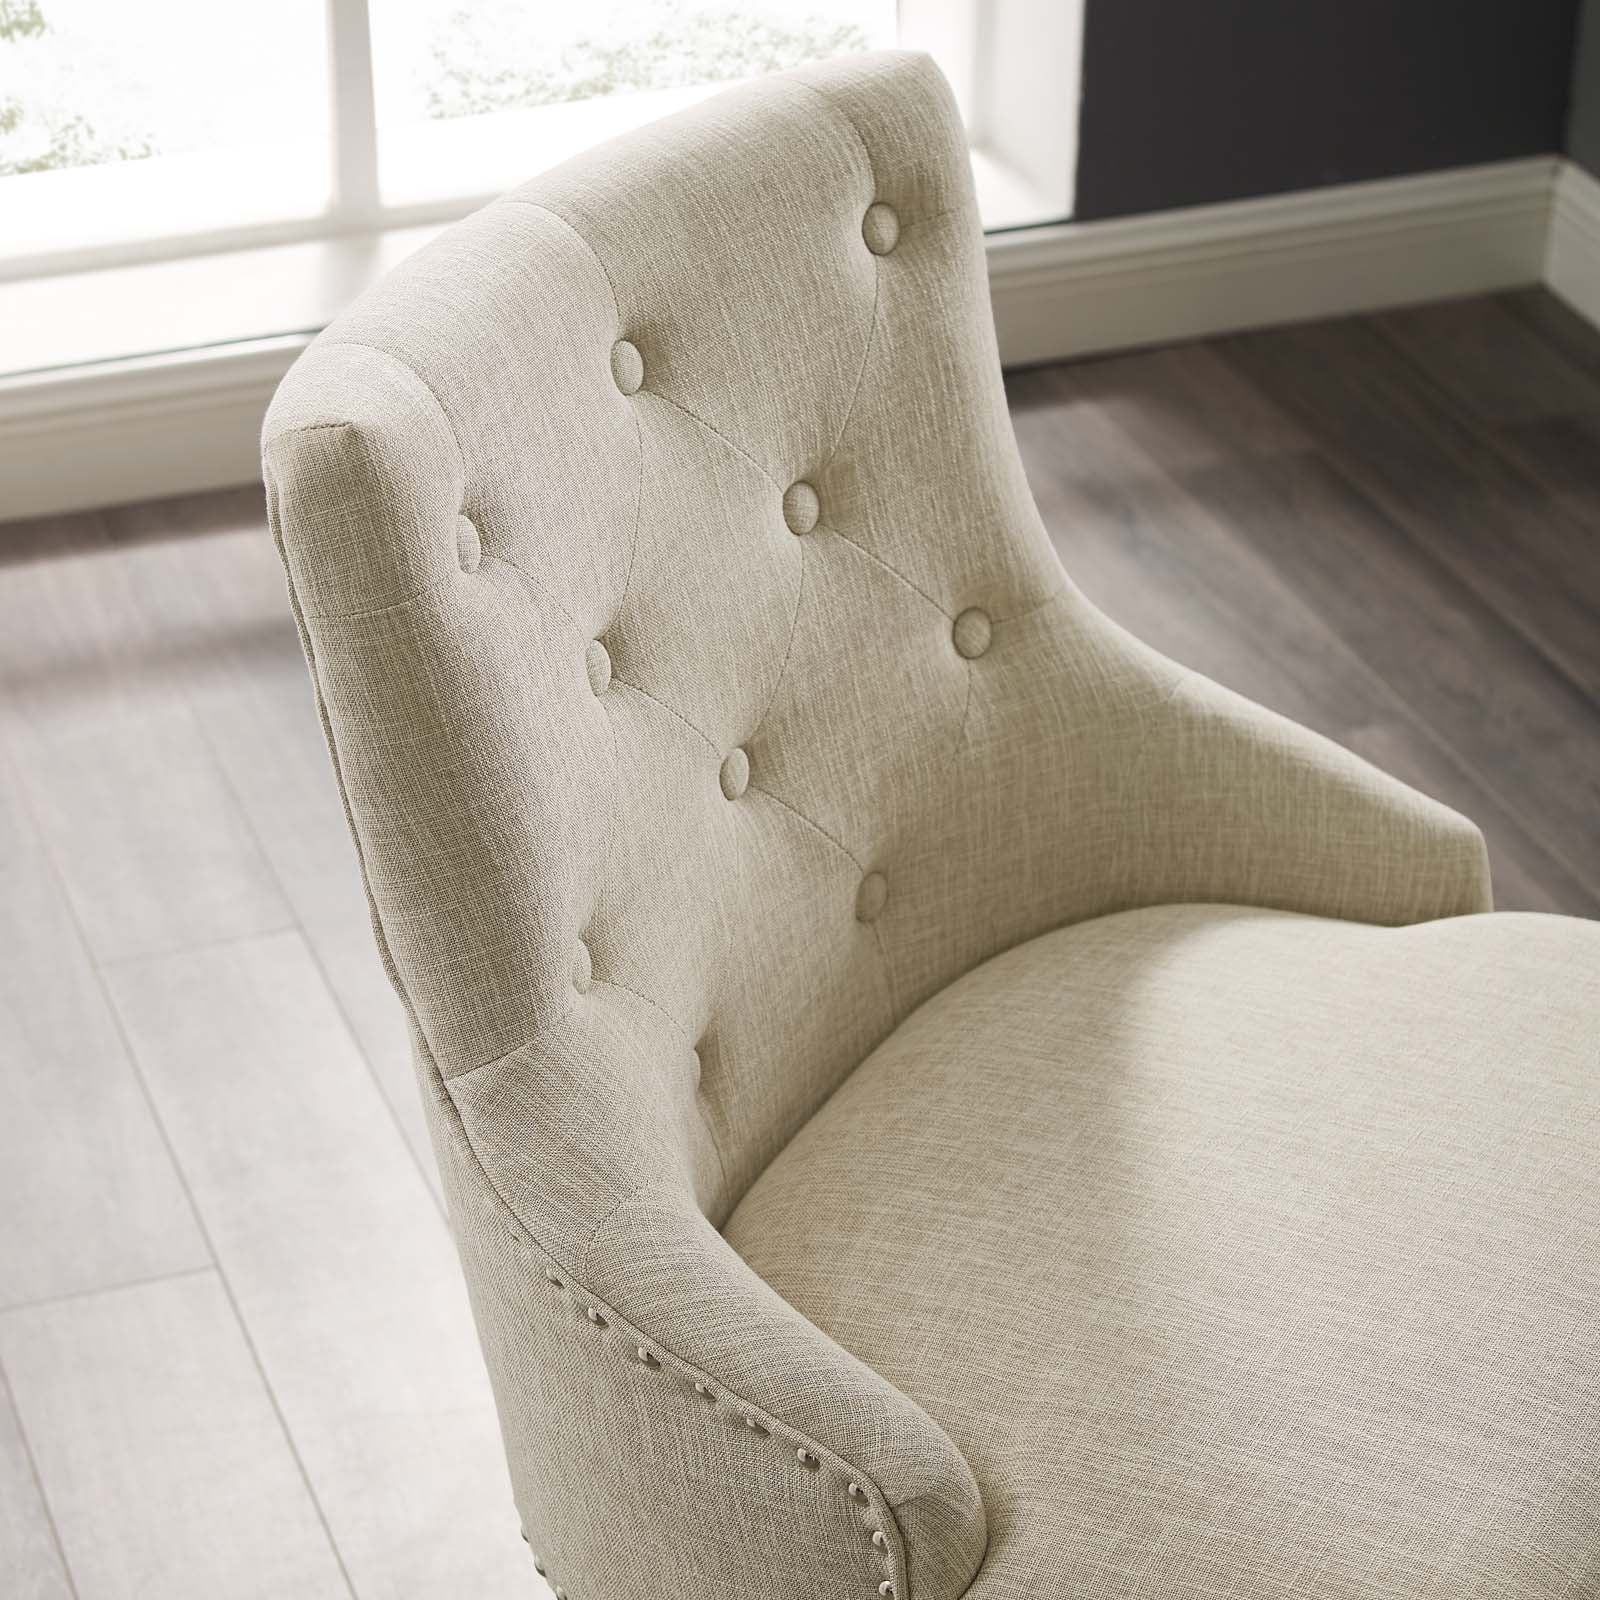 Regent Tufted Button Swivel Upholstered Fabric Office Chair - East Shore Modern Home Furnishings